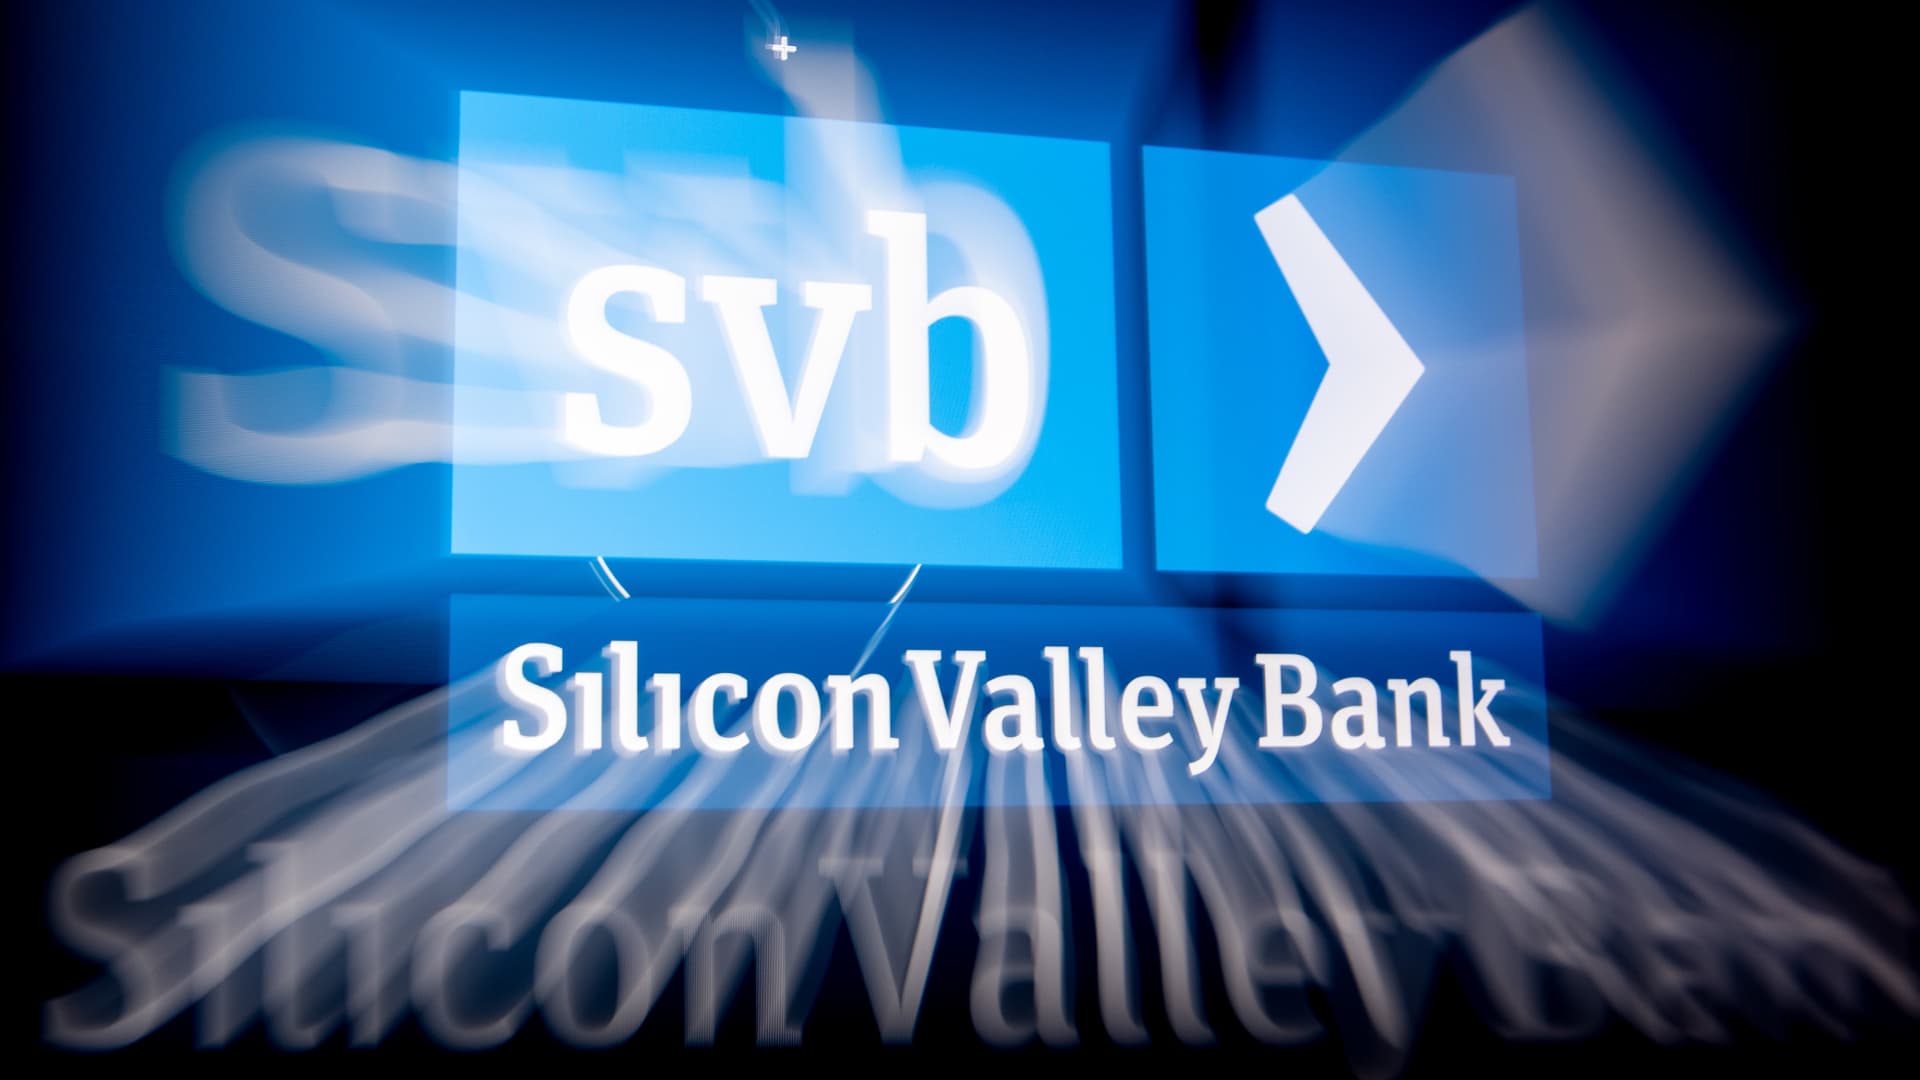 Silicon Valley investors and founders express shock over SVB’s collapse, describe struggles to get money out